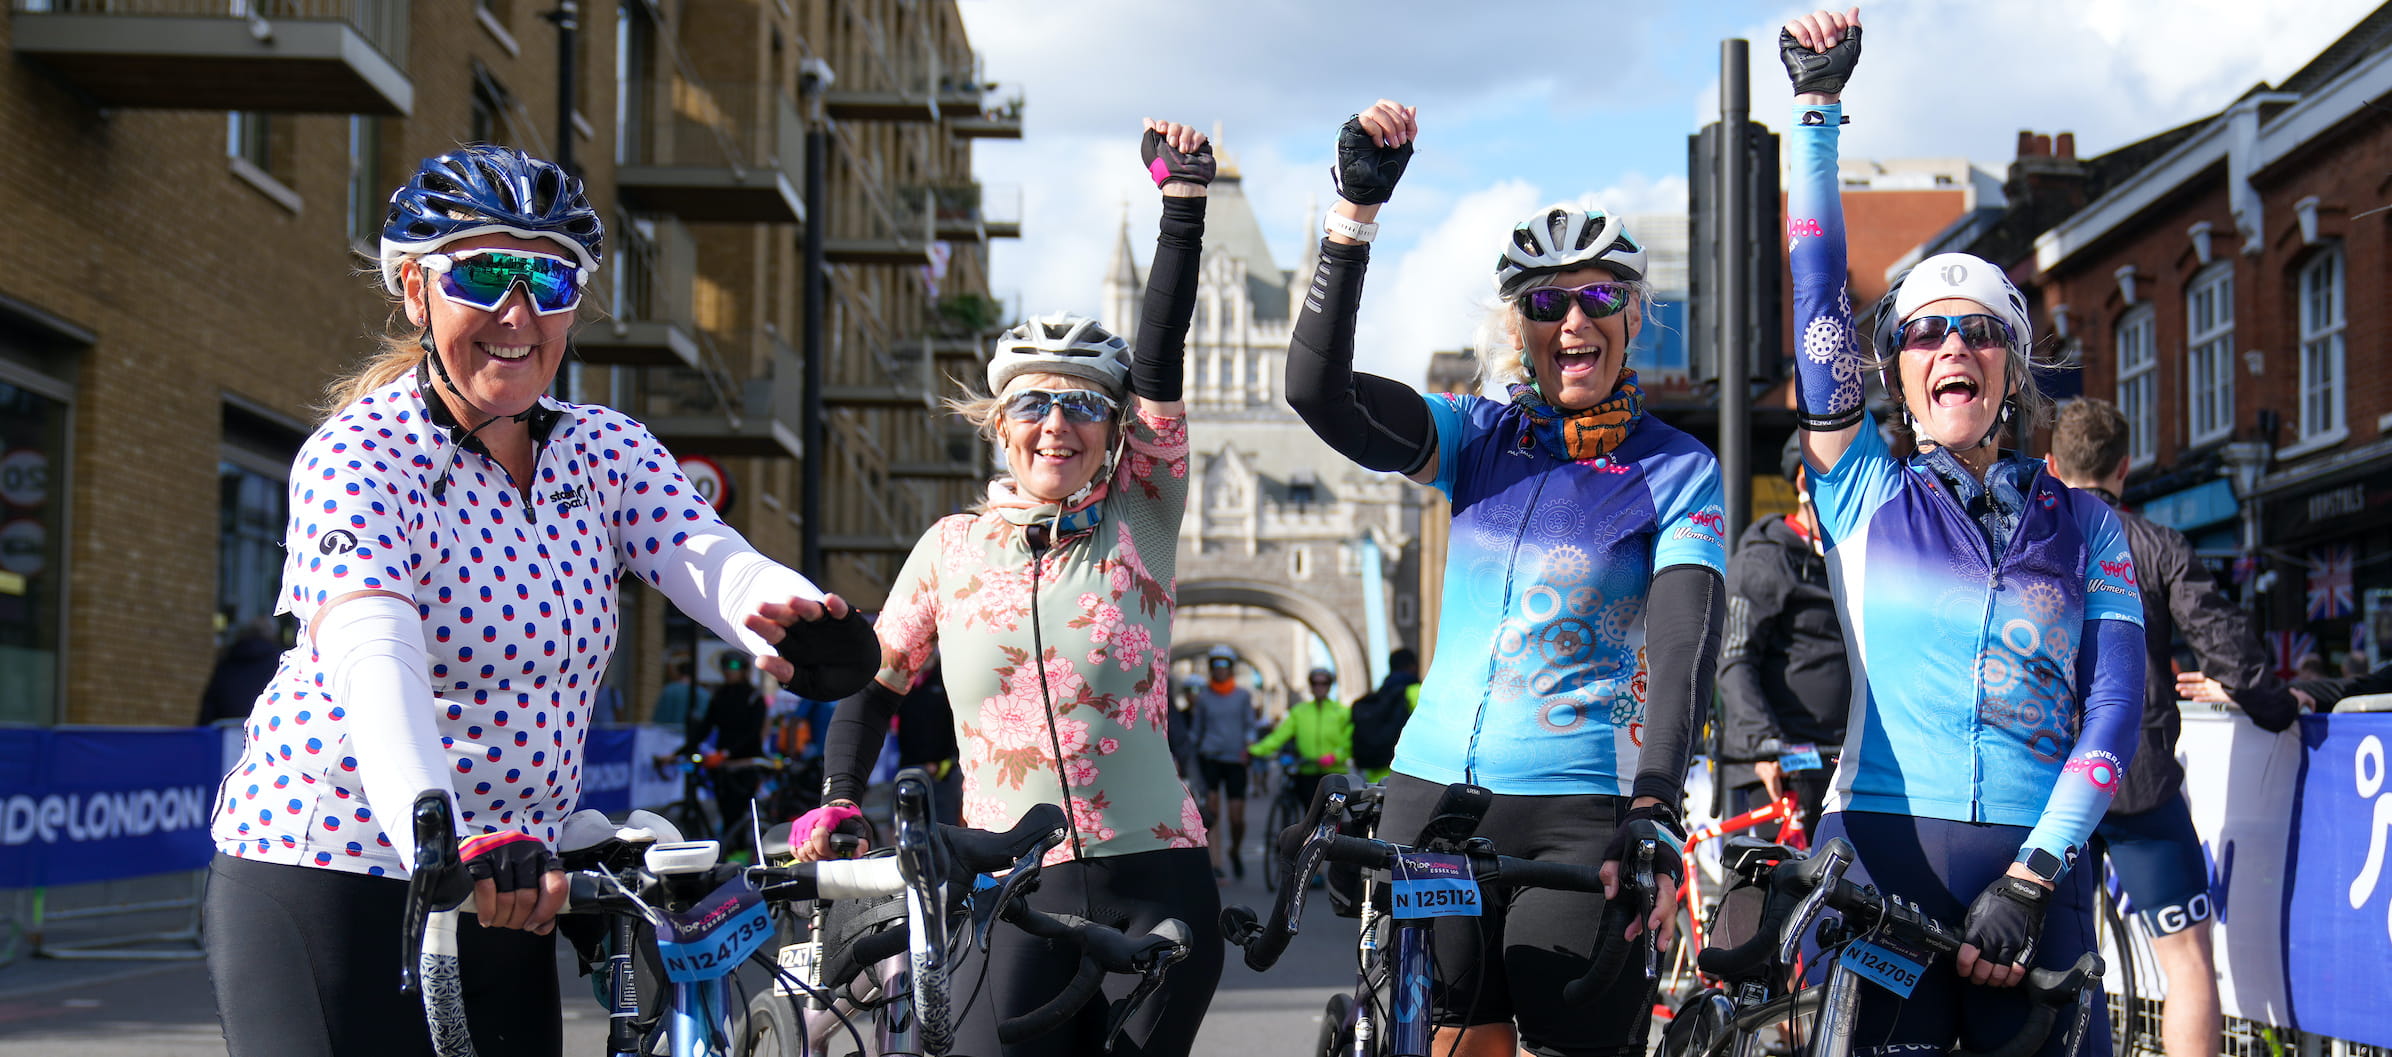 A group of cheering participants in the RideLondon-Essex sportive